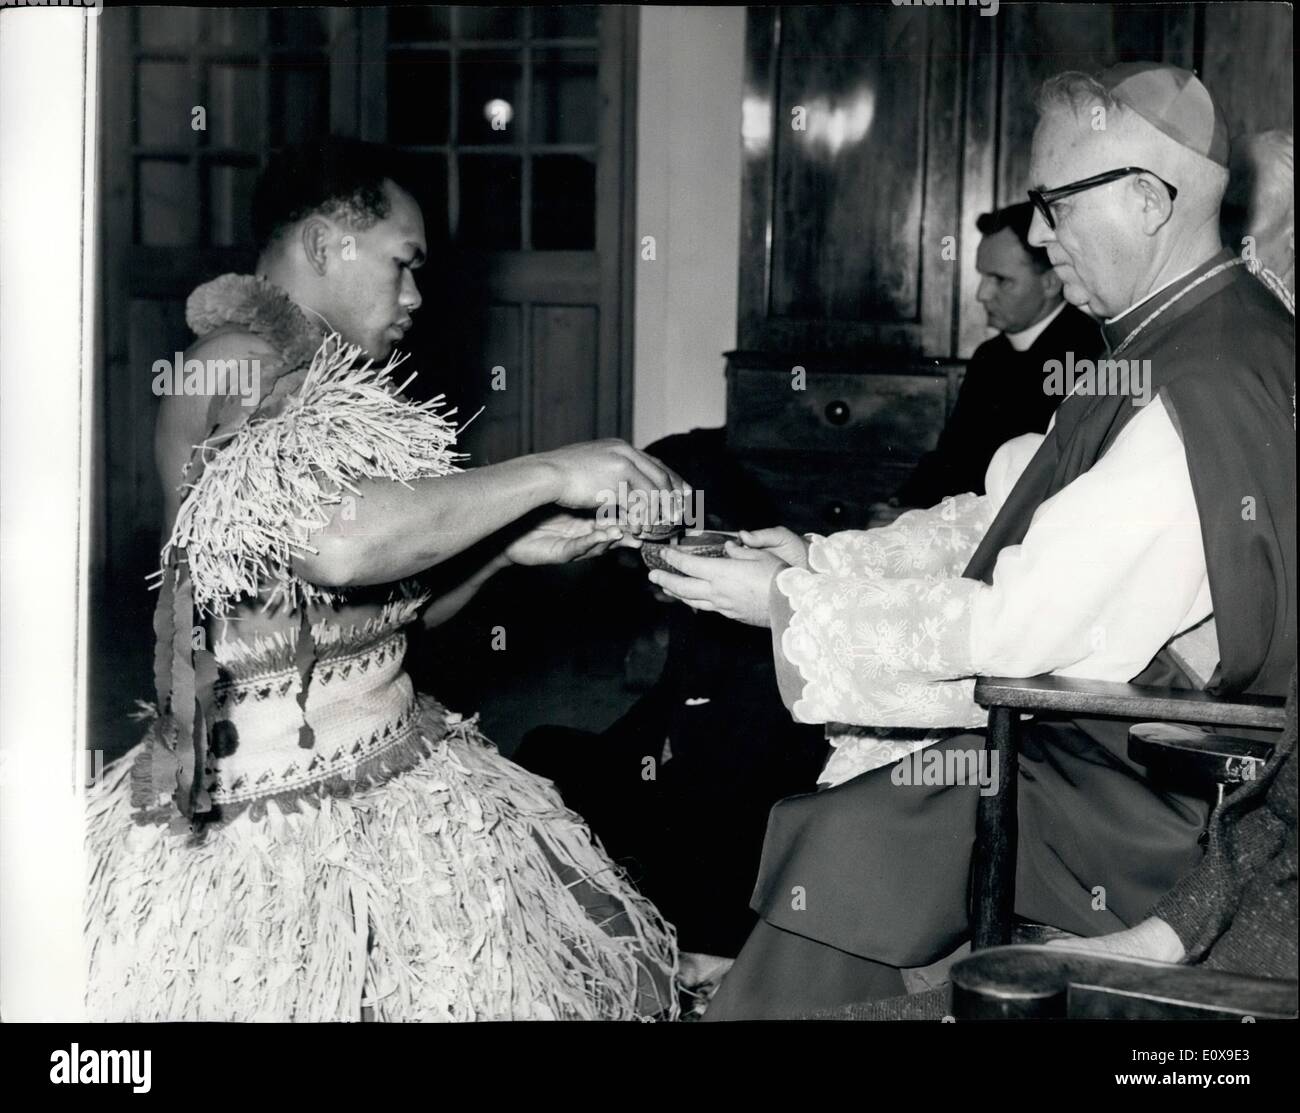 Oct. 10, 1965 - Son of a Fijian Chief ordained a priest at Westminster Cathedral.; A Fijian, the Rev. Beato Ratuloco, the son of Ratu Vika, the chief of Solevu, on the island of Vanua Levu, Fiji, was ordained by the Bishop of Fiji, the Rt. Rev Victor Foley, who was born at Sandgate, Kent. The Bishop went to Fiji as a newly ordained priest in 1936 and was appointed Bishop eight years later. After the ordination ceremony the rev. Ratuloco's many Fijian friends in England offered their congratulations in the Scared Heart Hall, Horseferry Road, according to their native custom Stock Photo